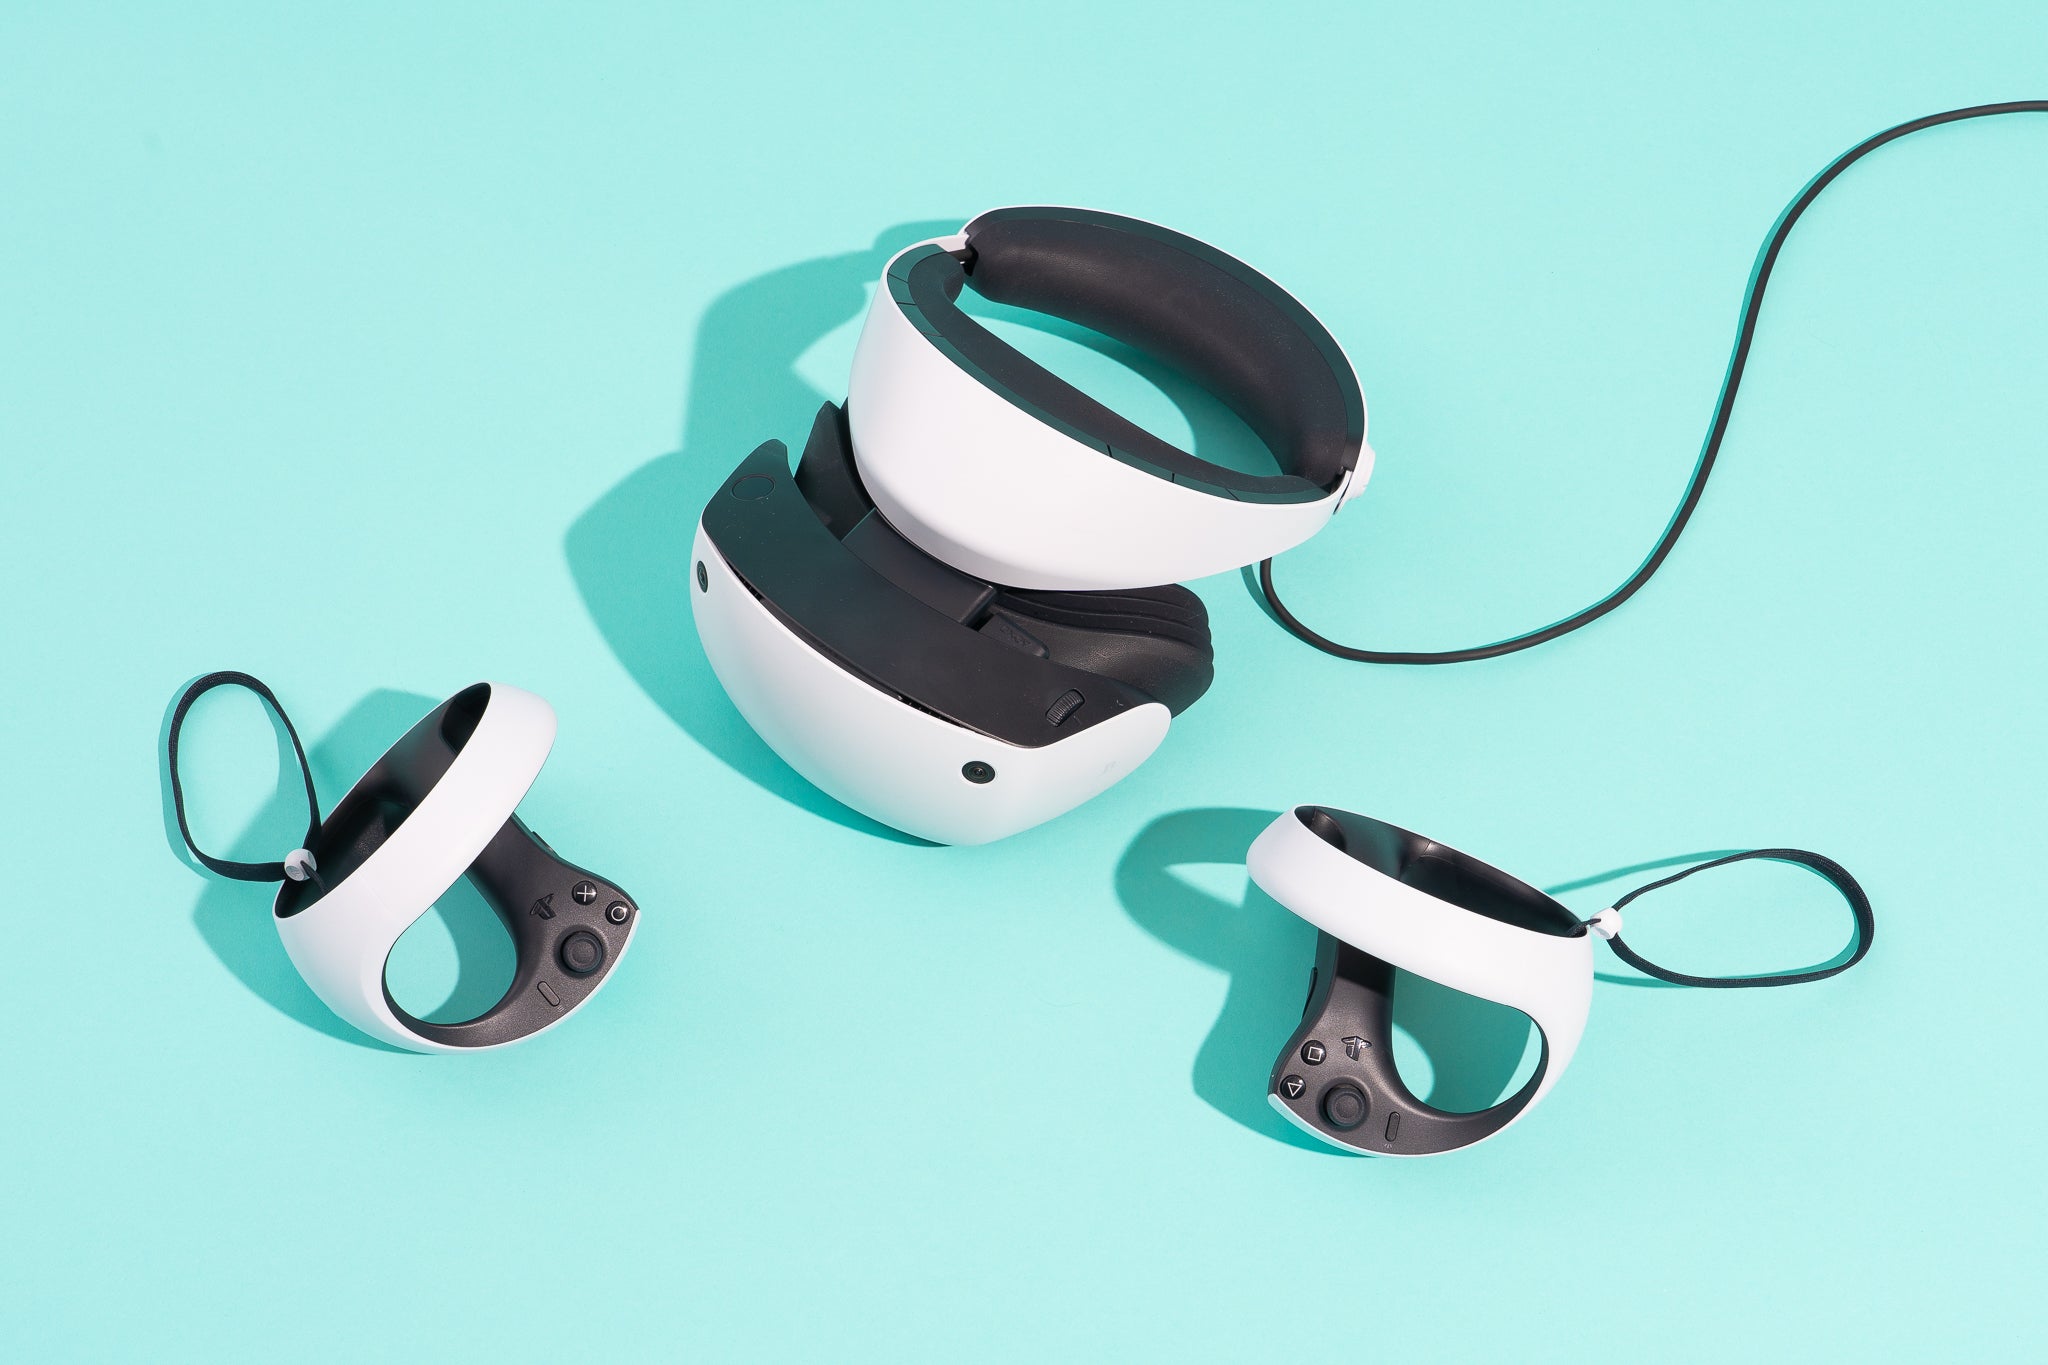 https://www.nytimes.com/wirecutter/reviews/best-standalone-vr-headset/